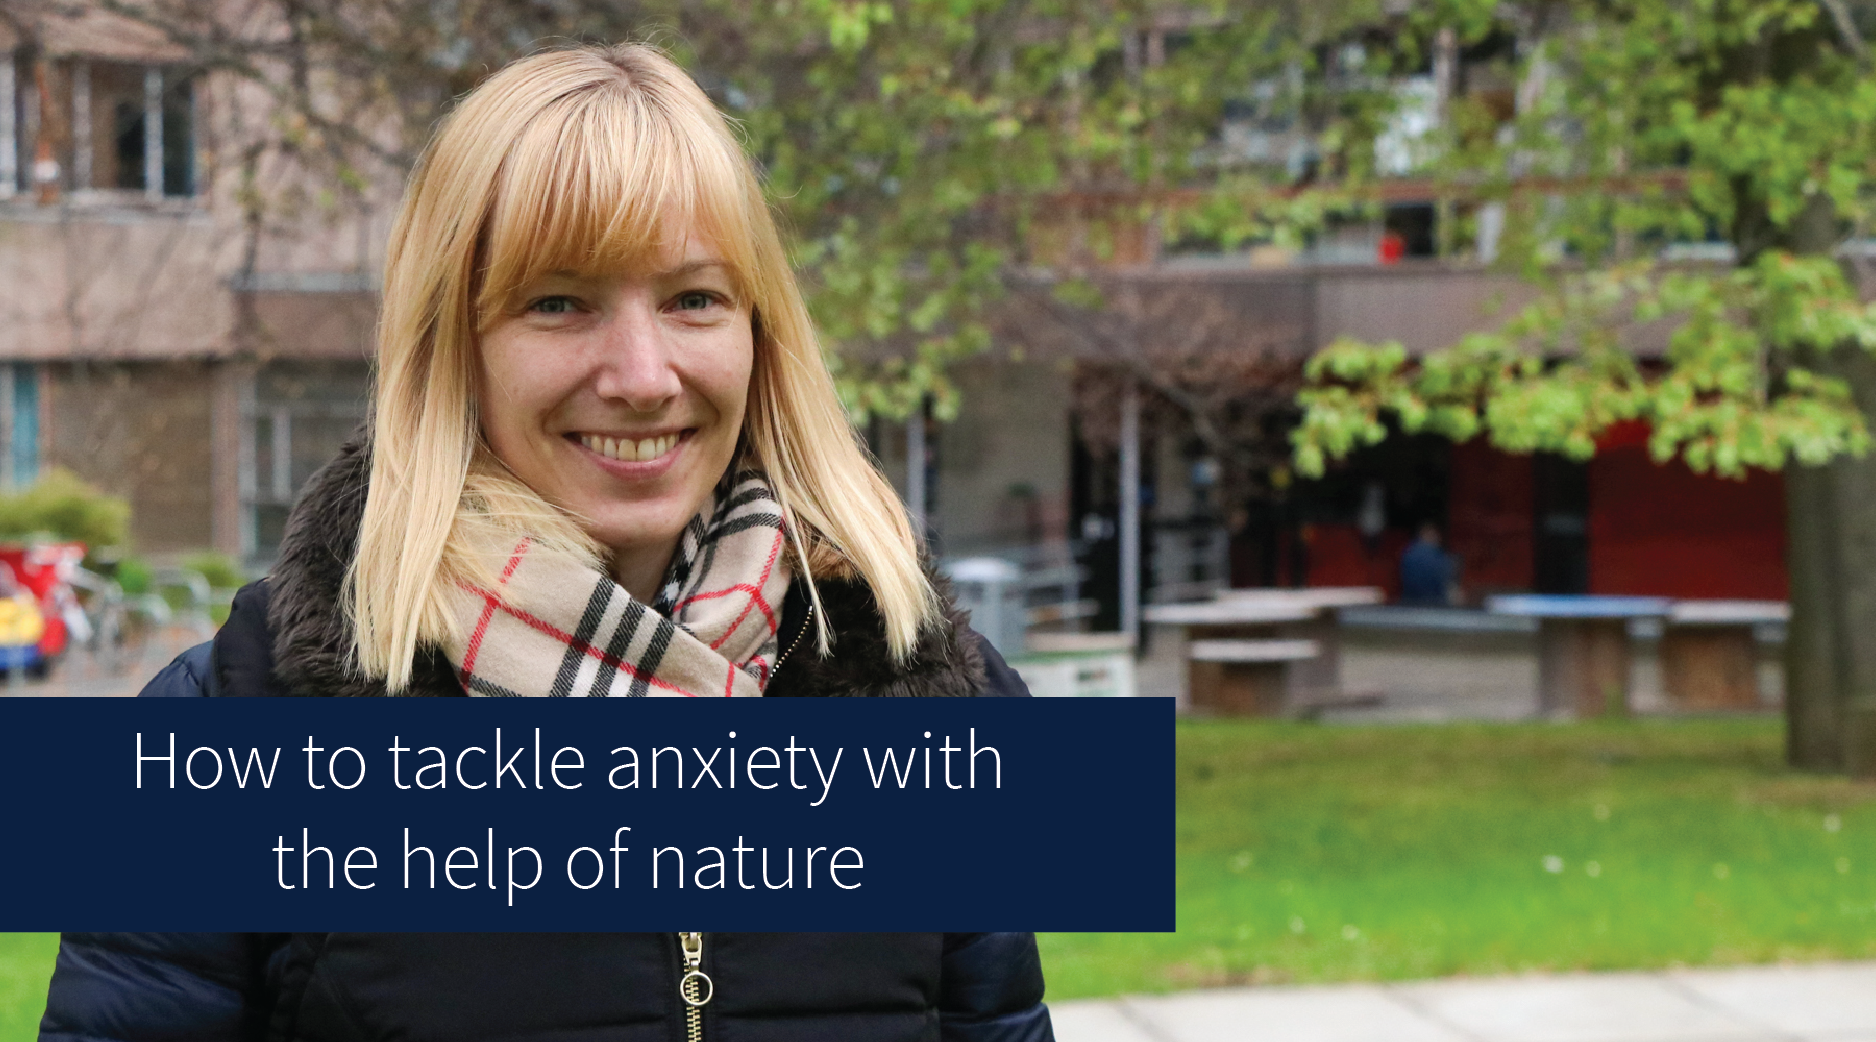 Kim Vender: How to tackle anxiety with the help of nature